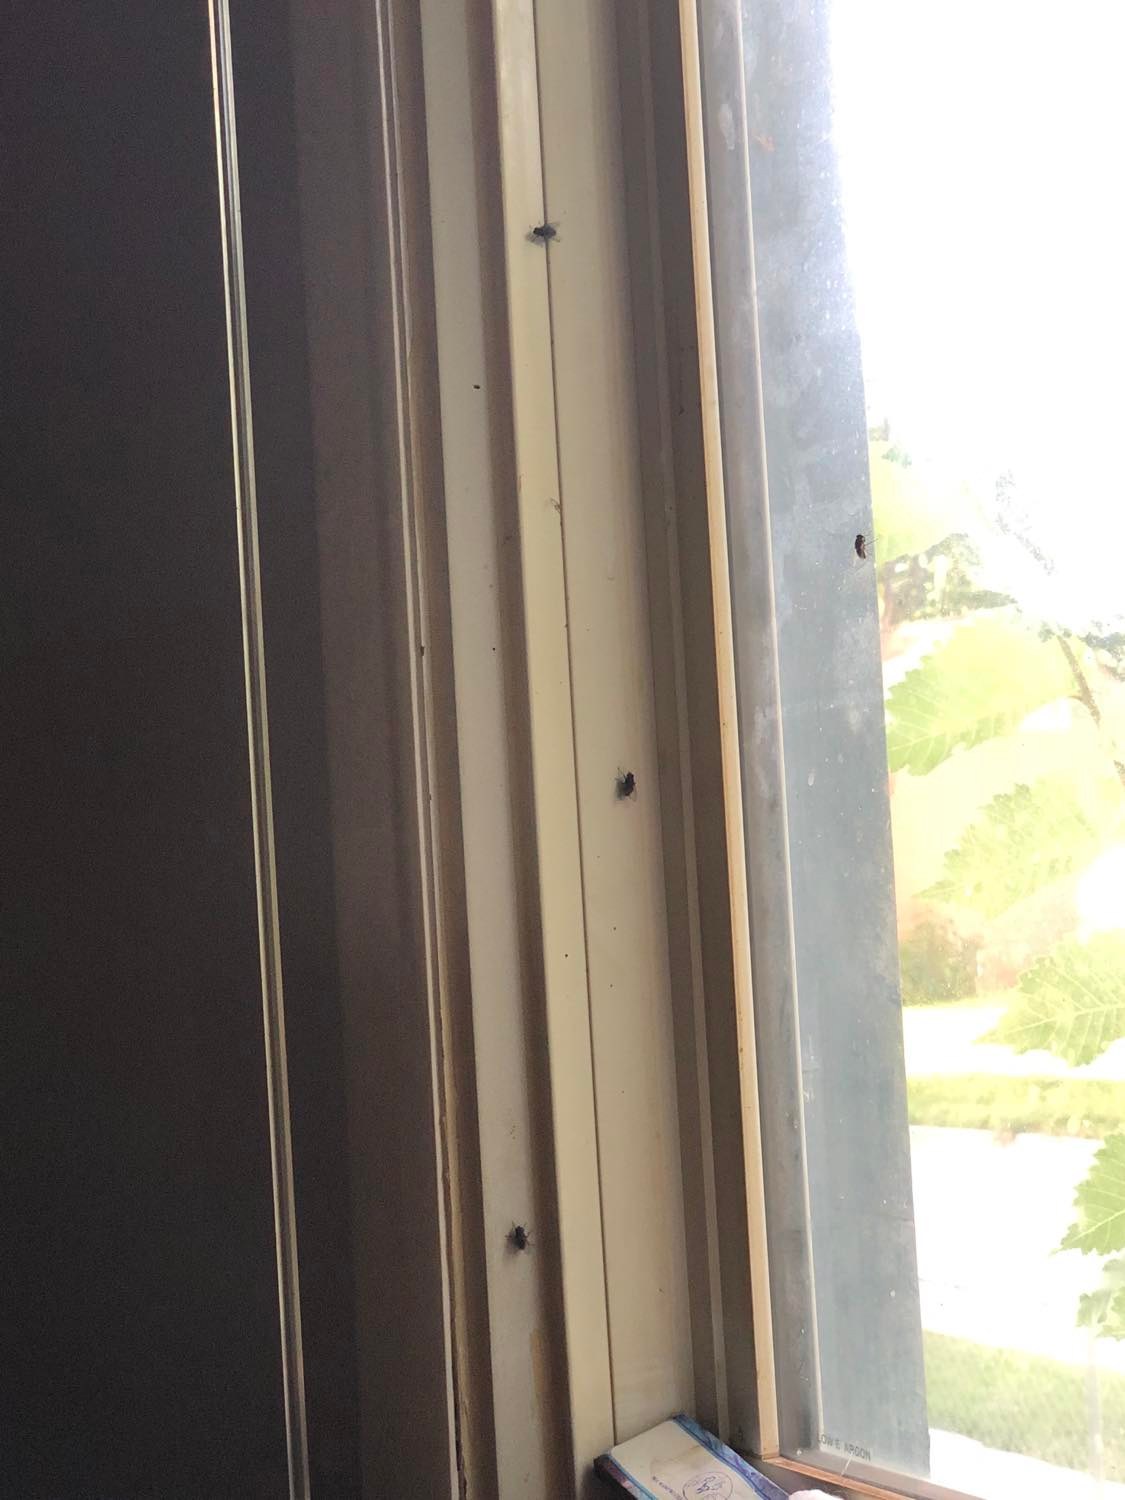 Three houseflies on the side of a window, and one on the glass, tree leaves visible on the other side.